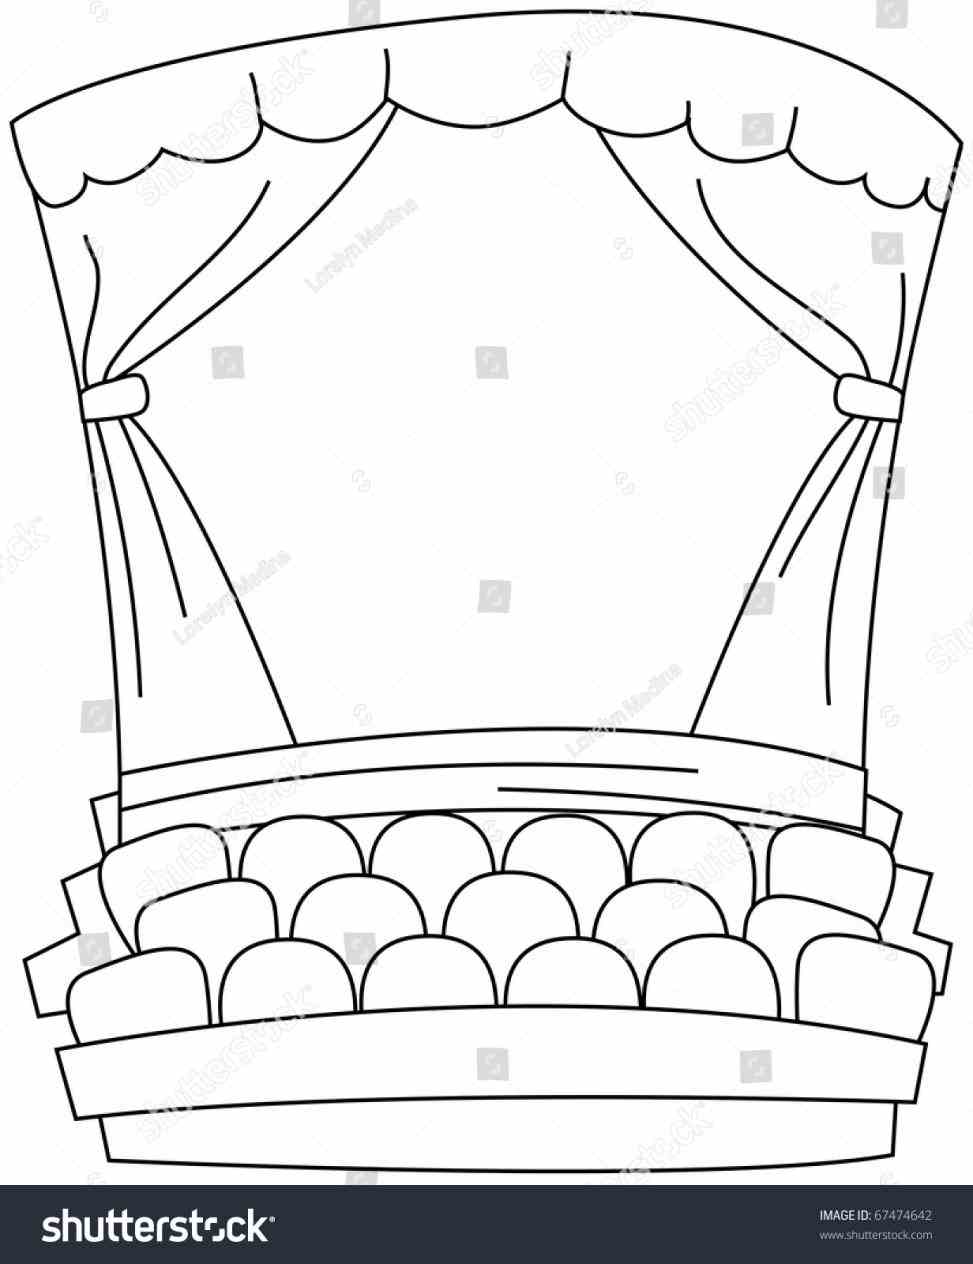 Movie Theater Coloring Pages At Getcolorings.com | Free Printable